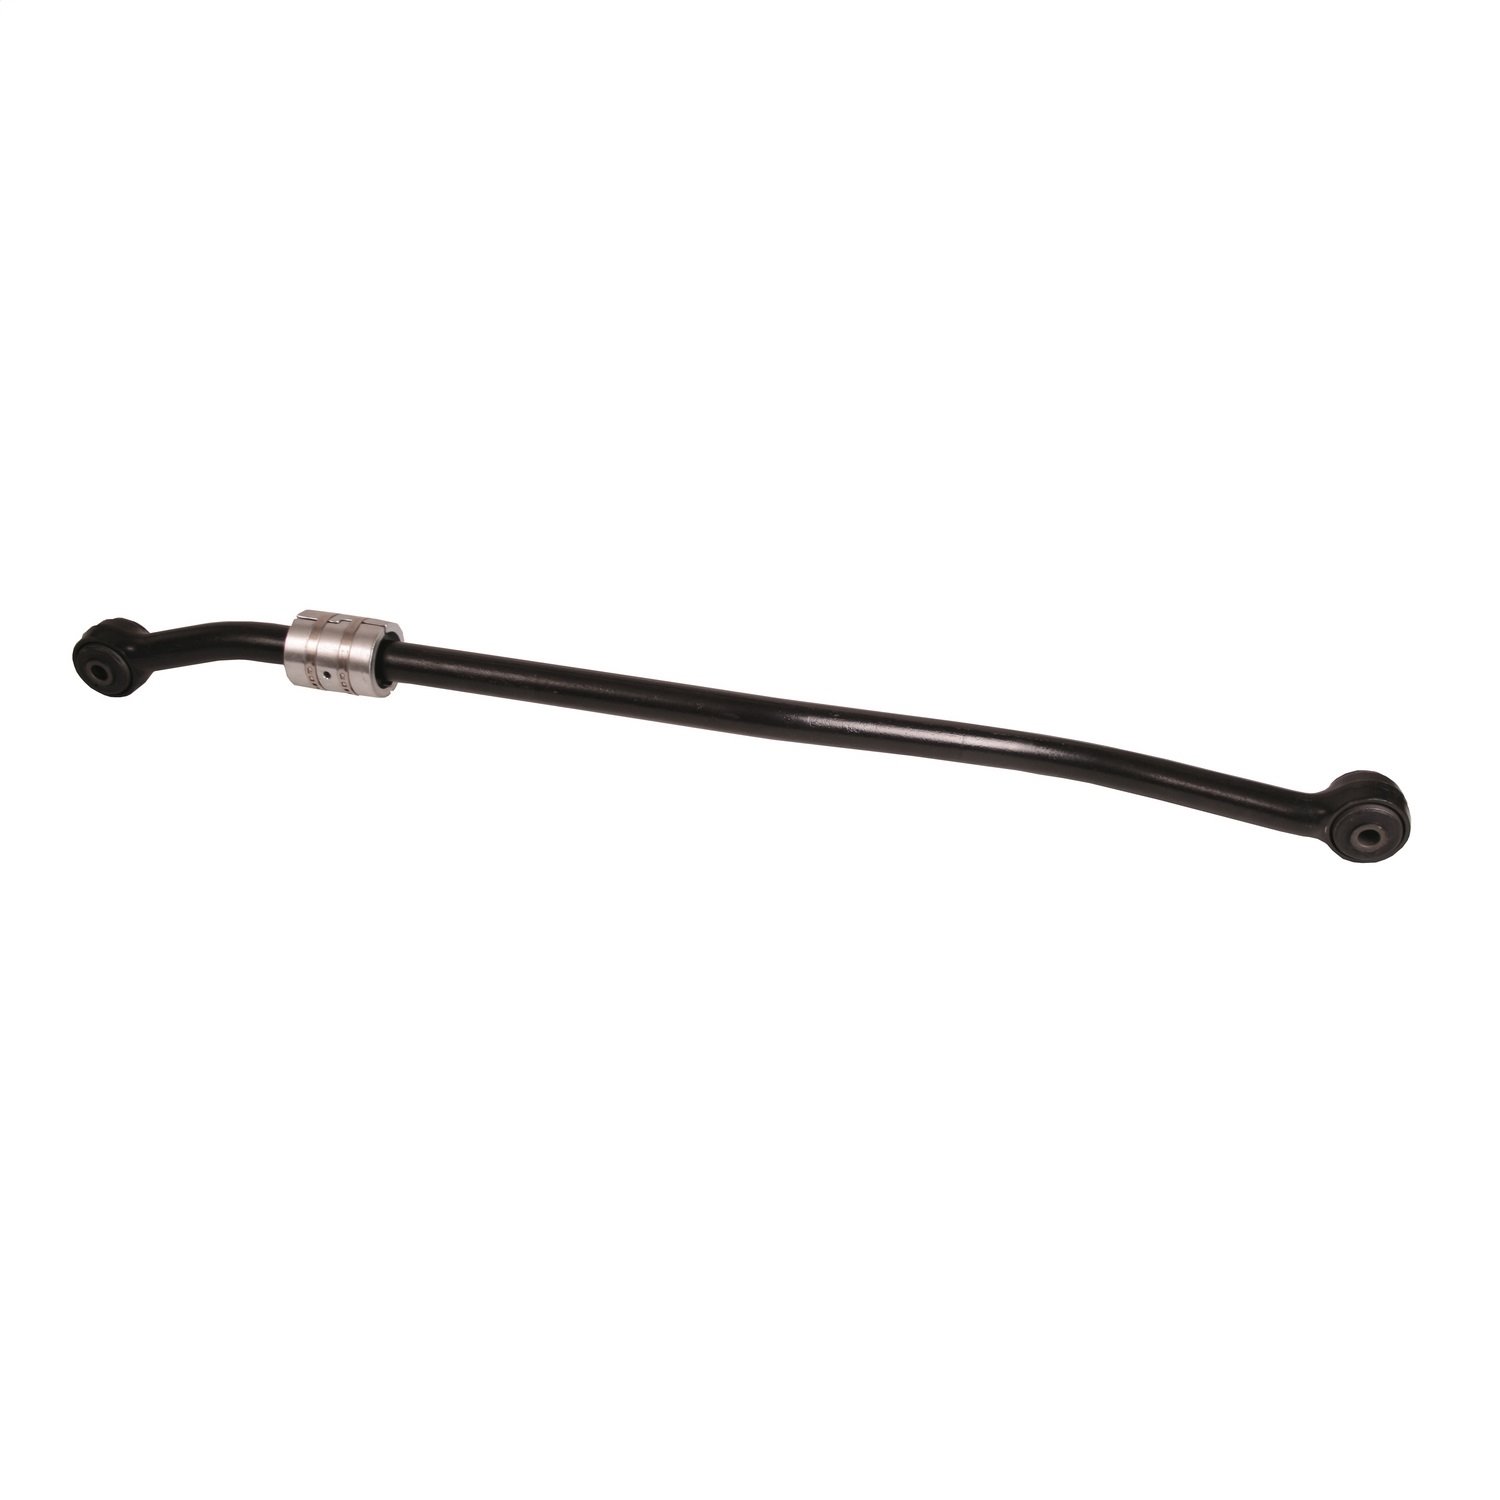 Replacement front track bar from Omix-ADA, Fits 99-04 Jeep Grand Cherokee WJIt is non-adjustable.